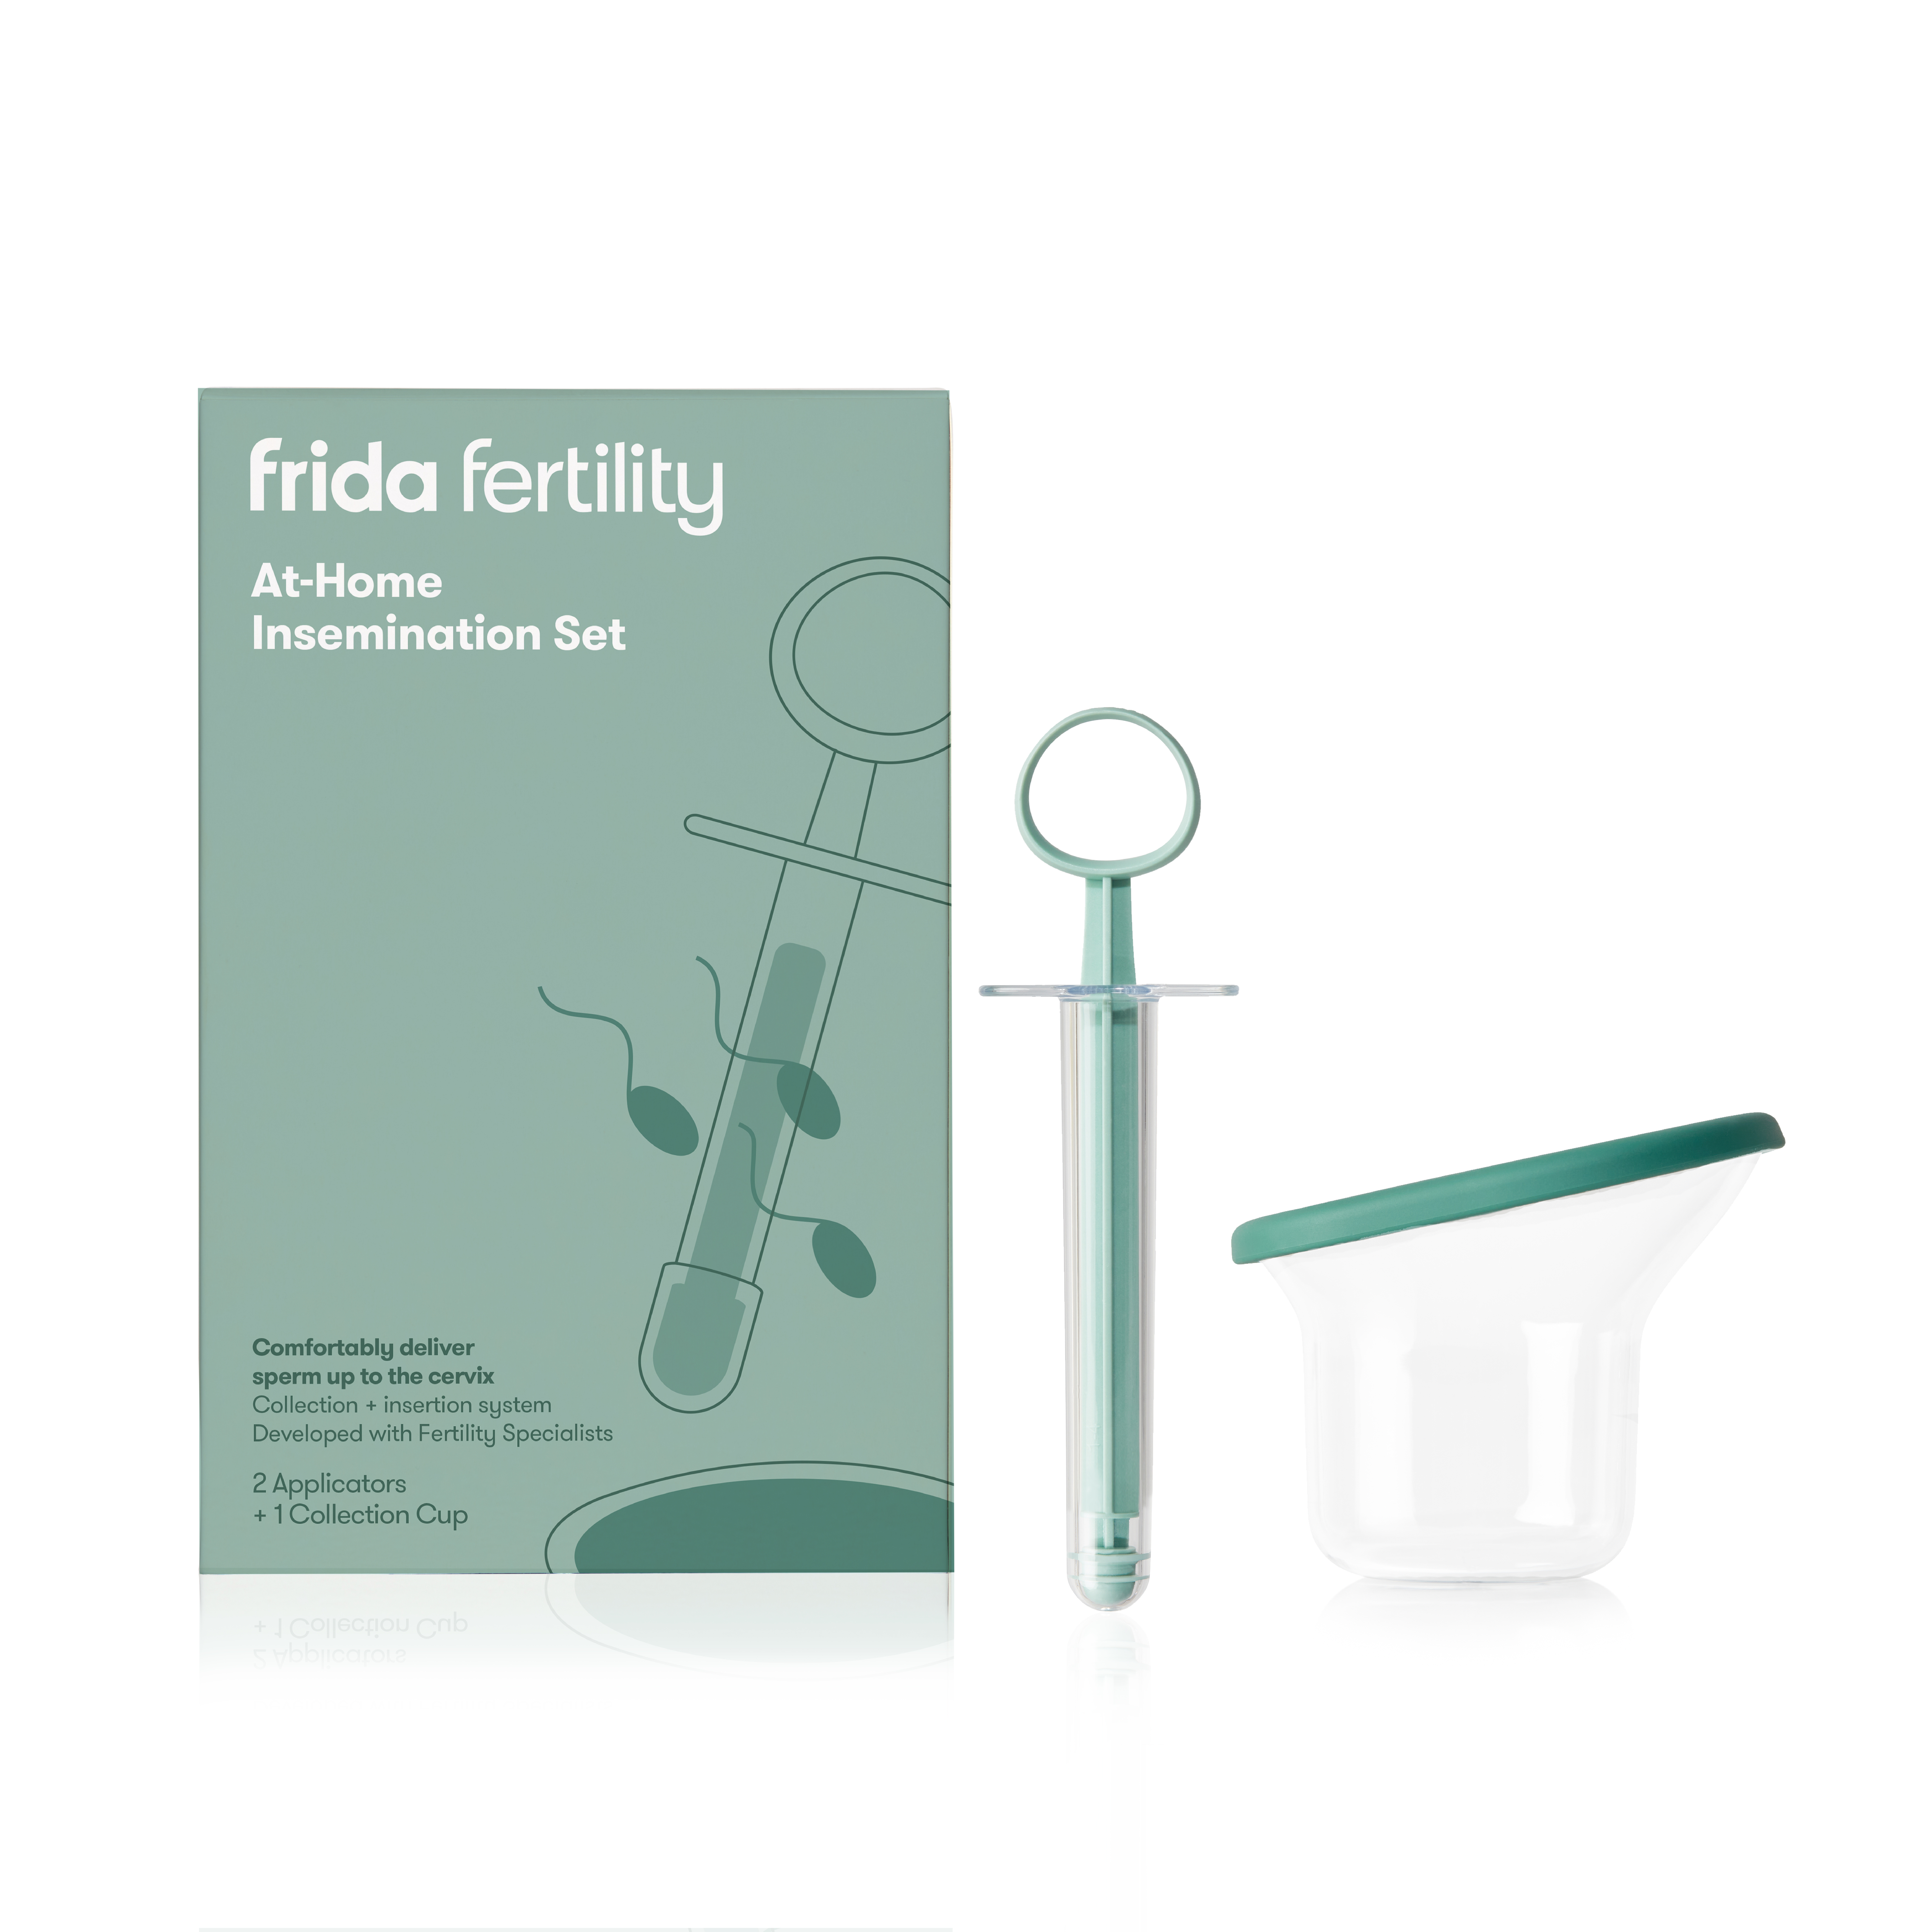 Frida Fertility At-Home Insemination Set - 2 Applicators, 1 Collection Cup